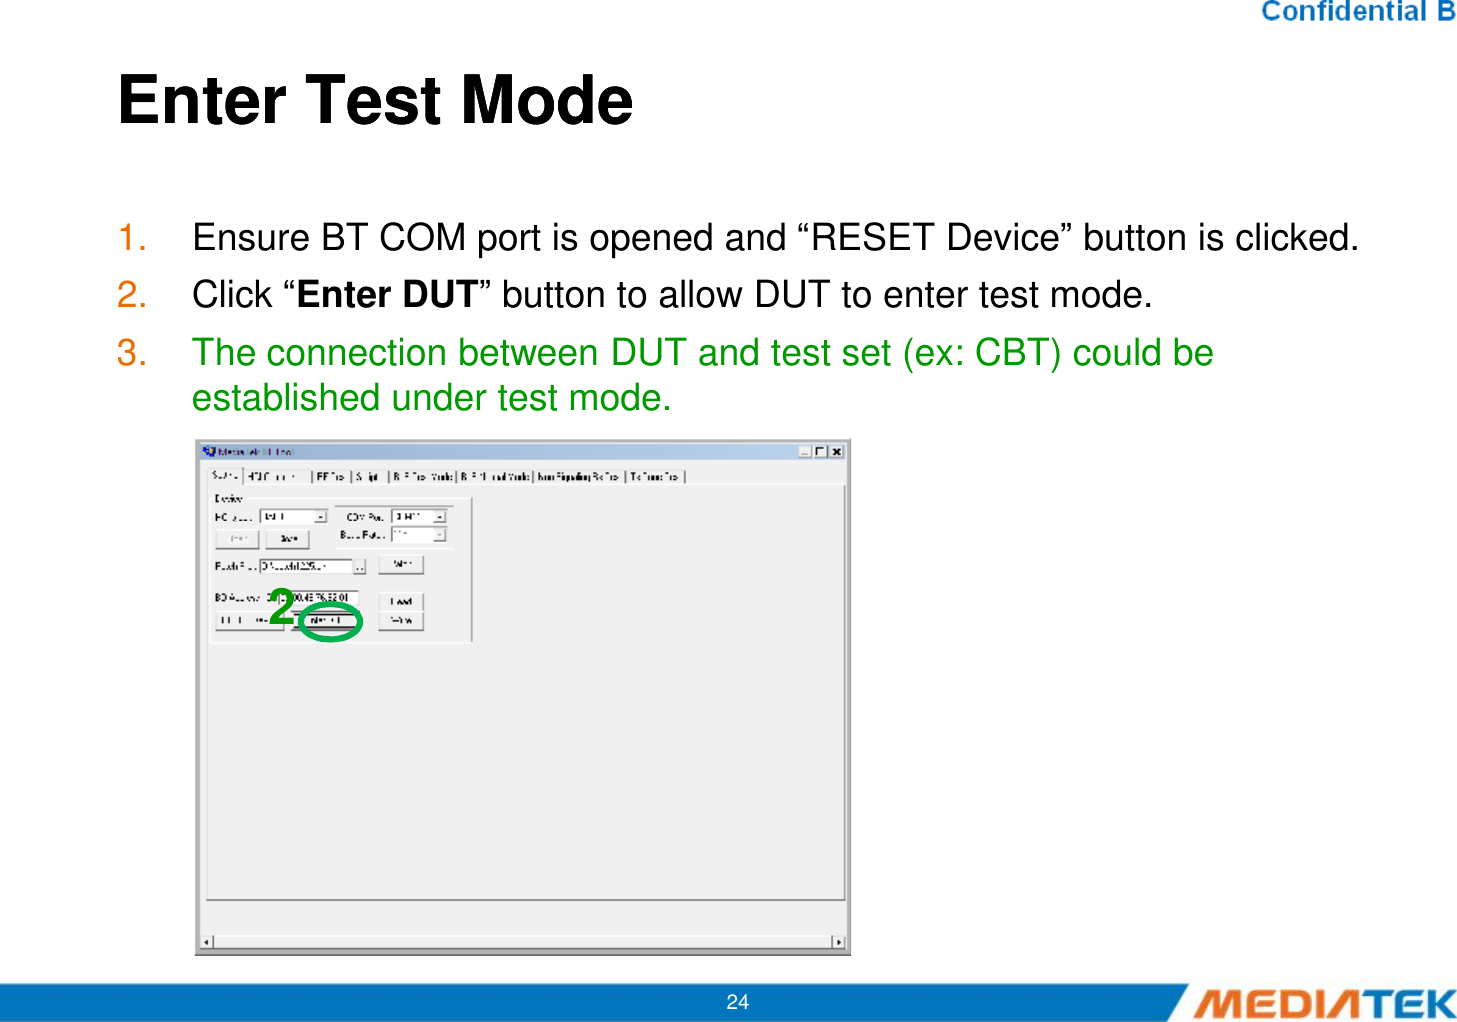 Enter Test Mode Enter Test Mode 1. Ensure BT COM port is opened and “RESET Device” button is clicked.2. Click “Enter DUT” button to allow DUT to enter test mode.3. The connection between DUT and test set (ex: CBT) could be established under test mode.242